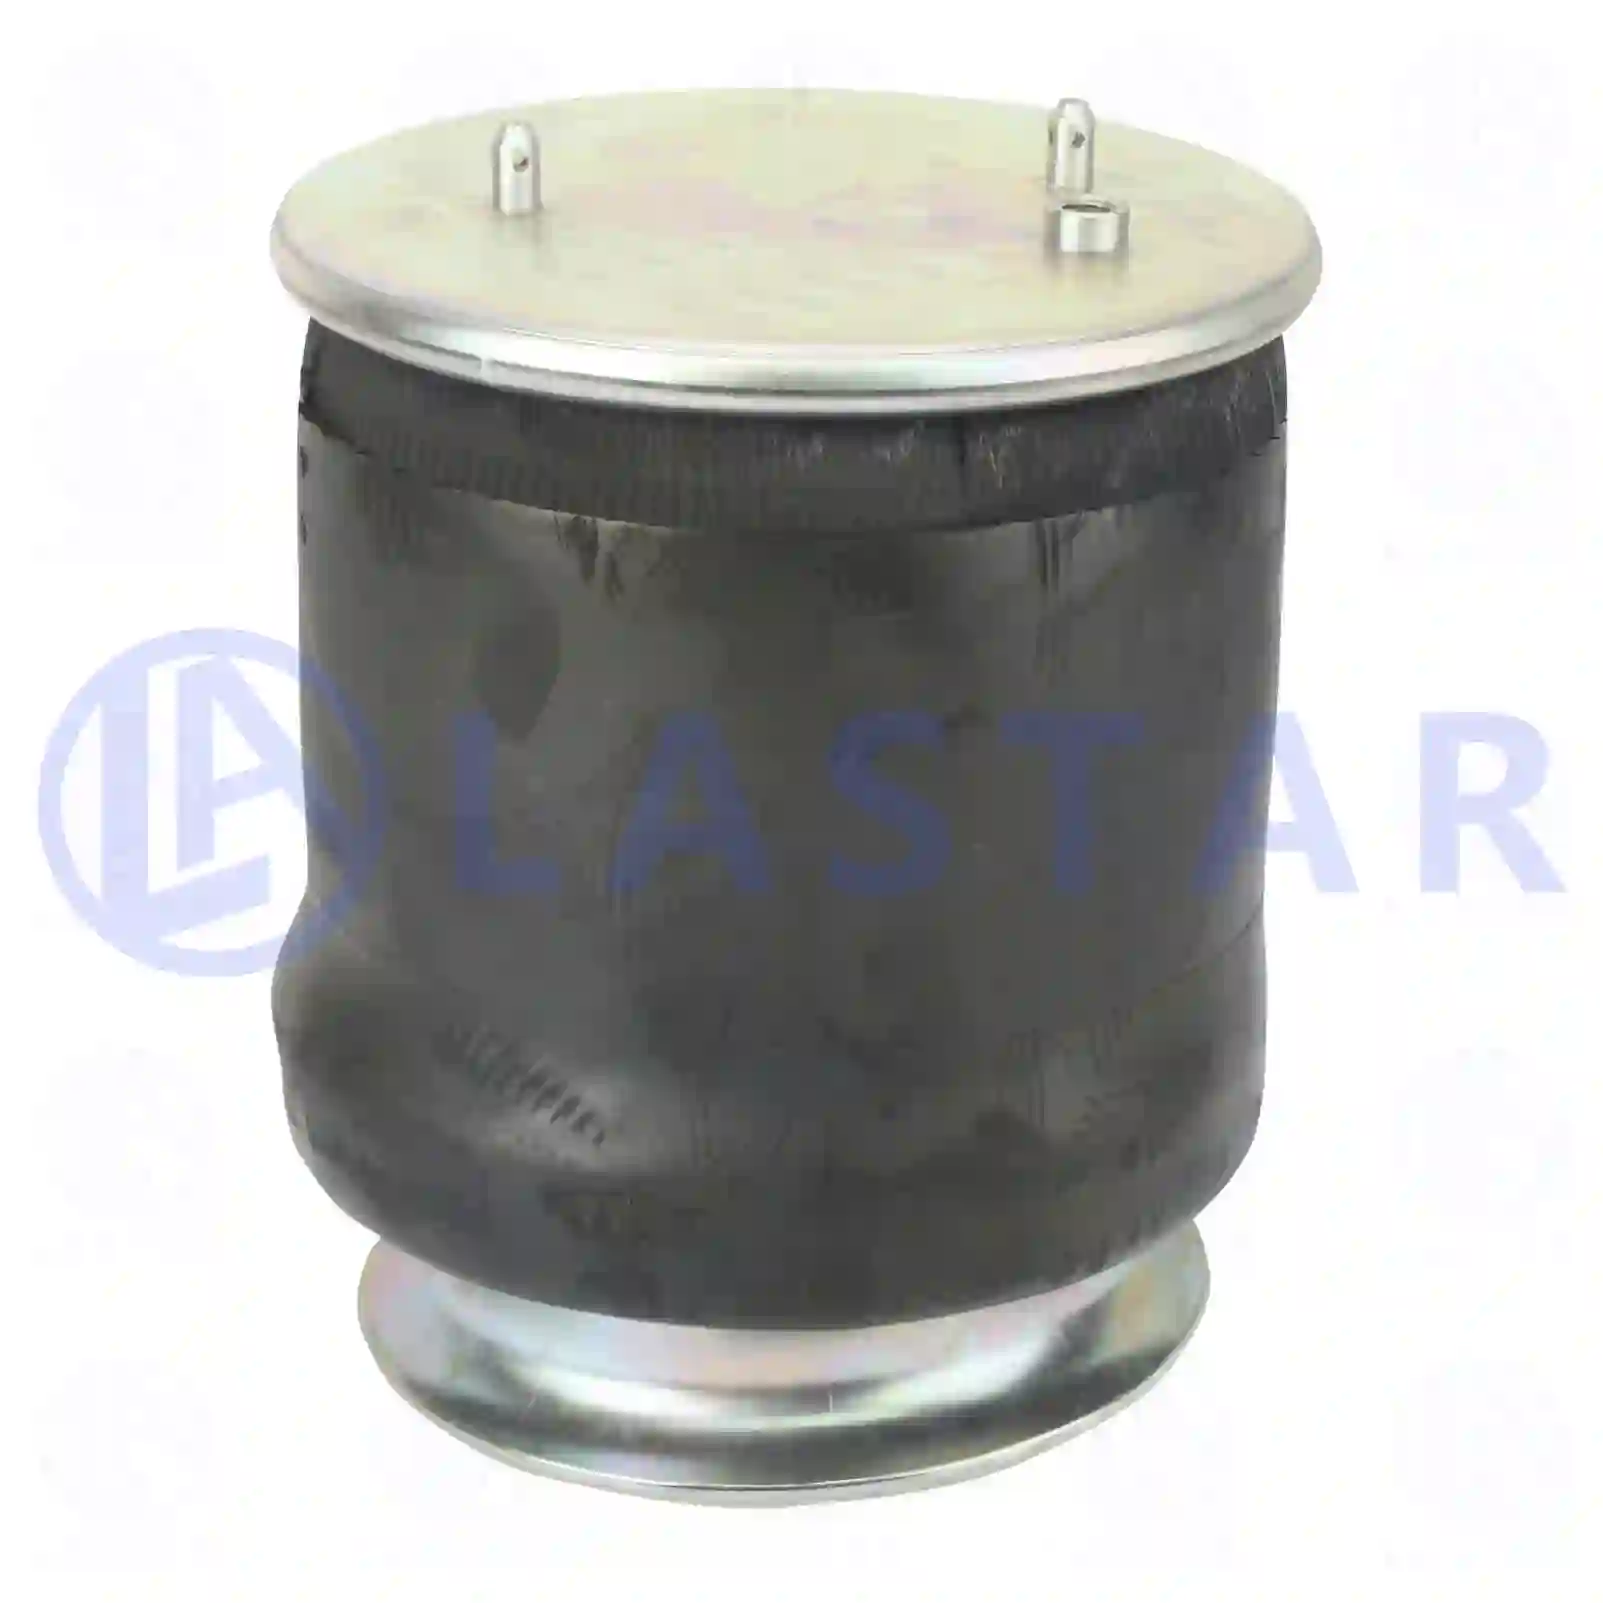 Air spring, with steel piston, 77729703, 1440302, 470921, 488266, ZG40735-0008 ||  77729703 Lastar Spare Part | Truck Spare Parts, Auotomotive Spare Parts Air spring, with steel piston, 77729703, 1440302, 470921, 488266, ZG40735-0008 ||  77729703 Lastar Spare Part | Truck Spare Parts, Auotomotive Spare Parts